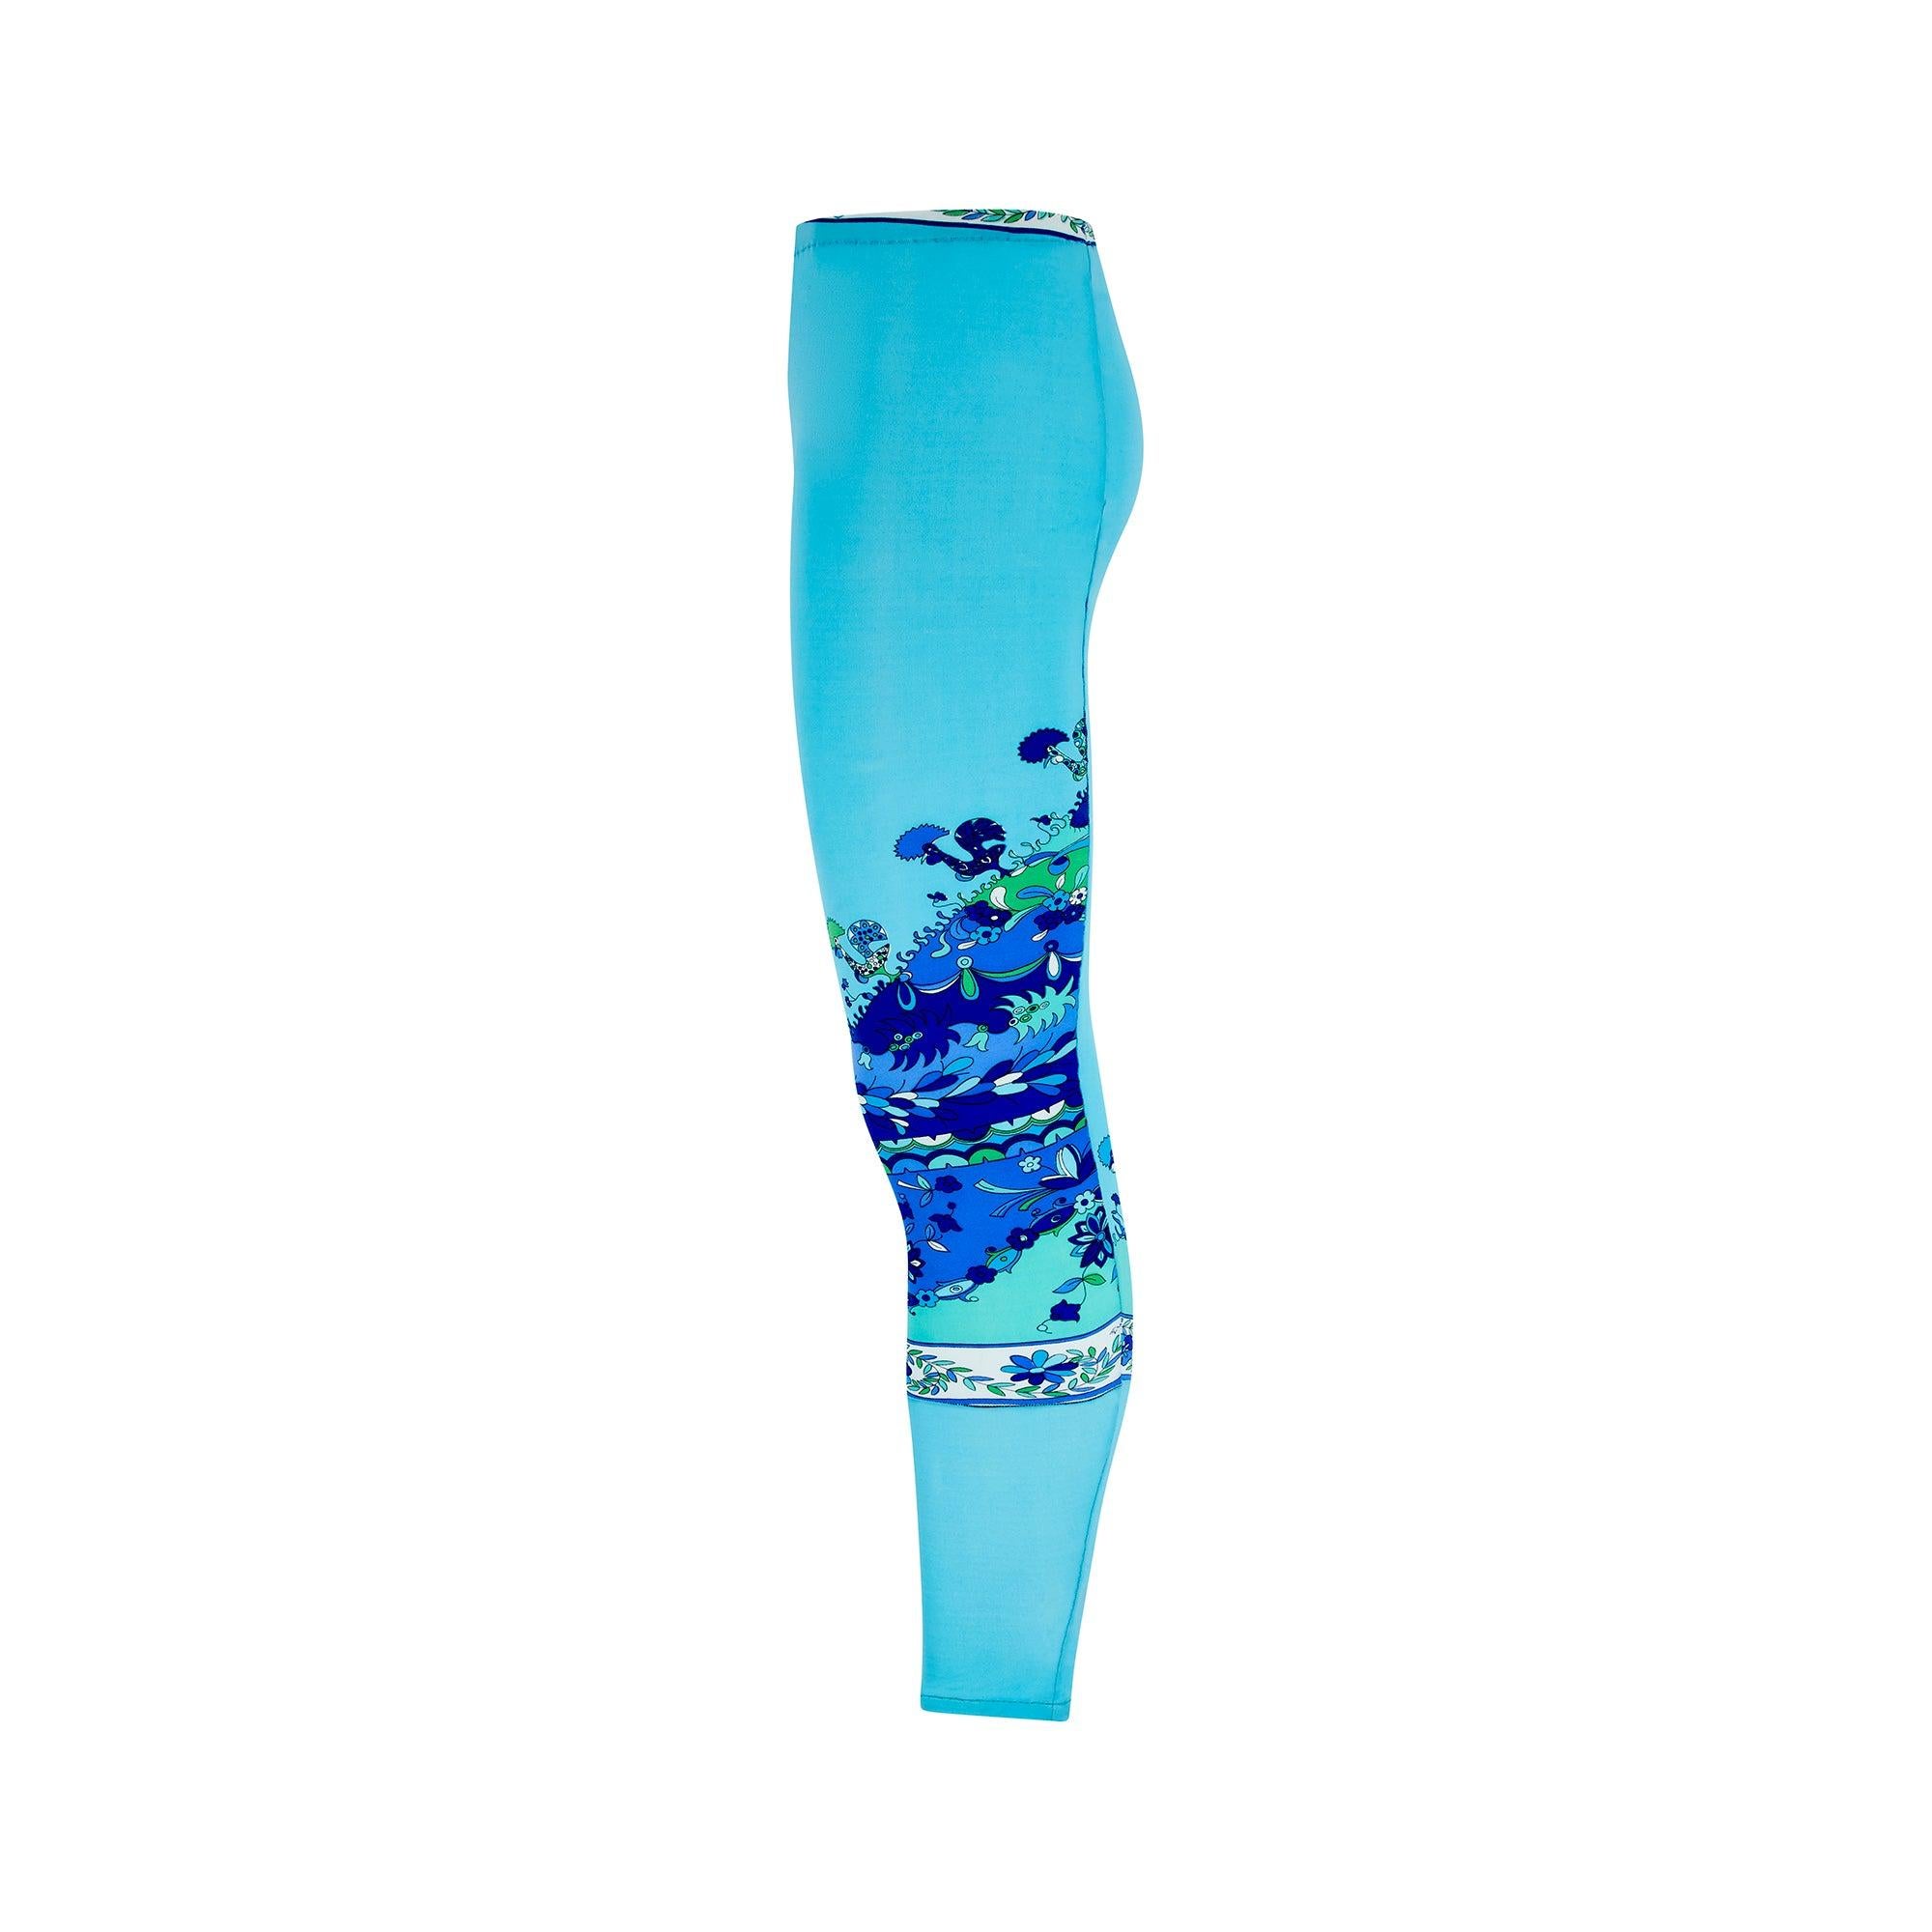 Dating to the late 1960s, these Pucci leggings are as vibrant as the day they were made. In eye-catching turquoise blue with that signature psychedelic Pucci print with florals in shades of purple, blue and green running down the legs - note the